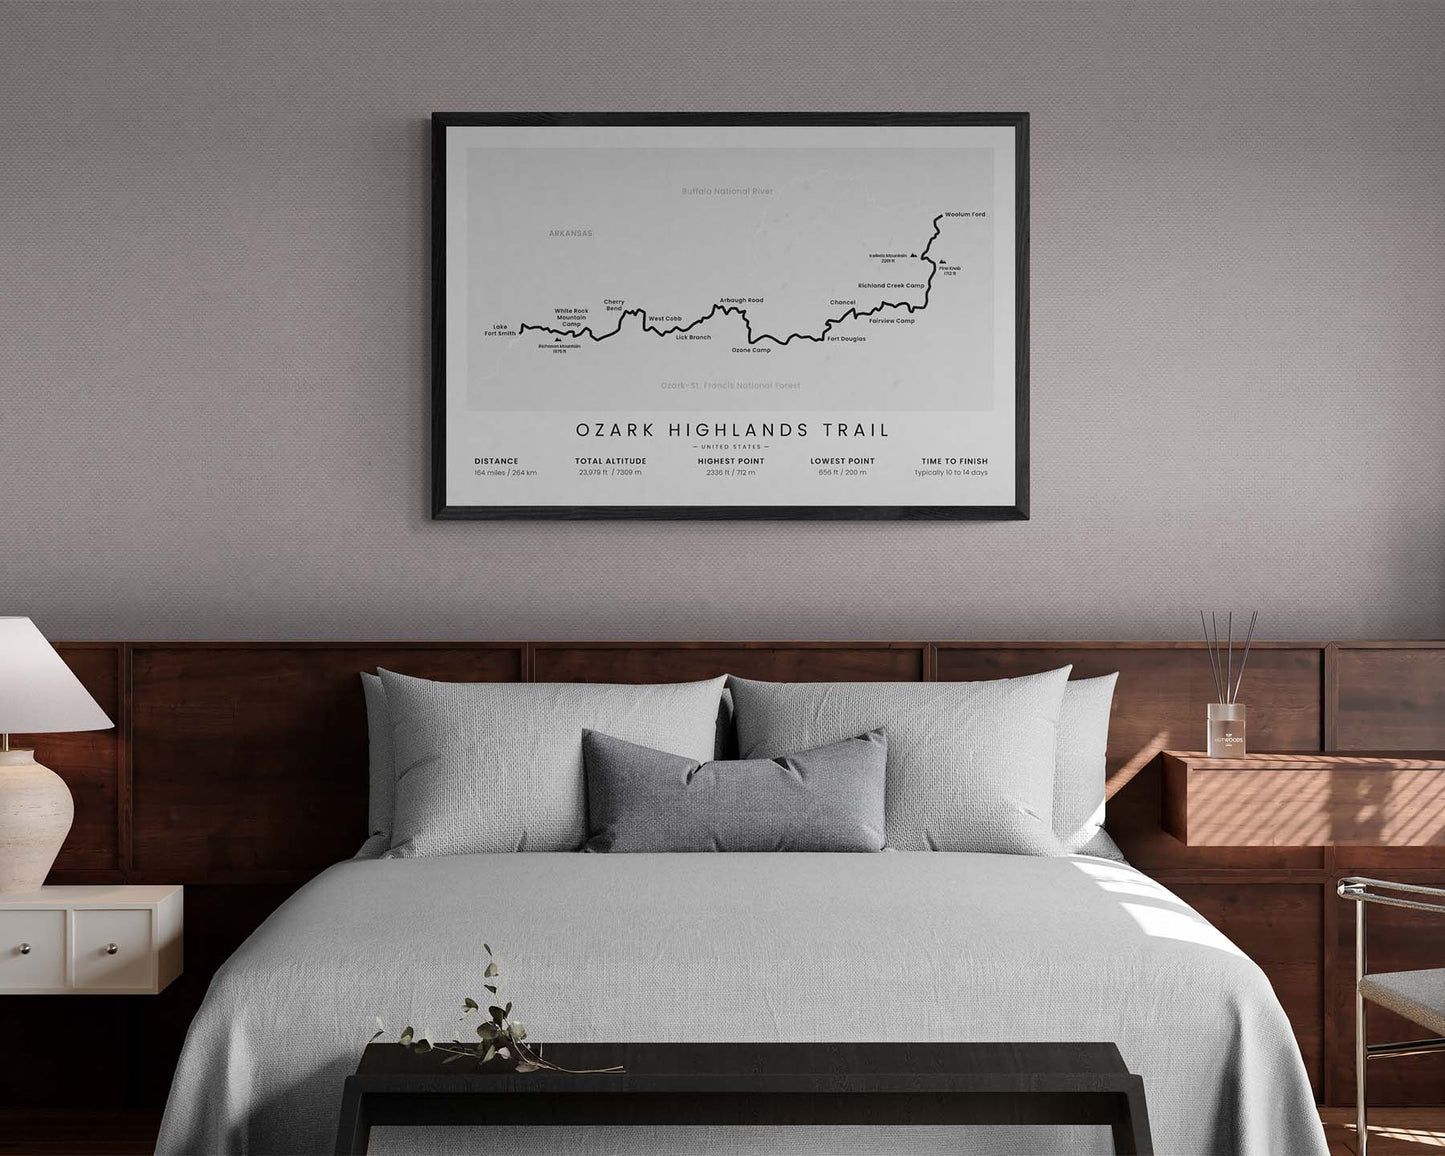 Ozark Highlands Trail (Ozark National Forest, Lake Fort Smith to Woolum Ford, United States, Ozark Mountains, Arkansas) Hike Wall Art in Minimal Room Decor